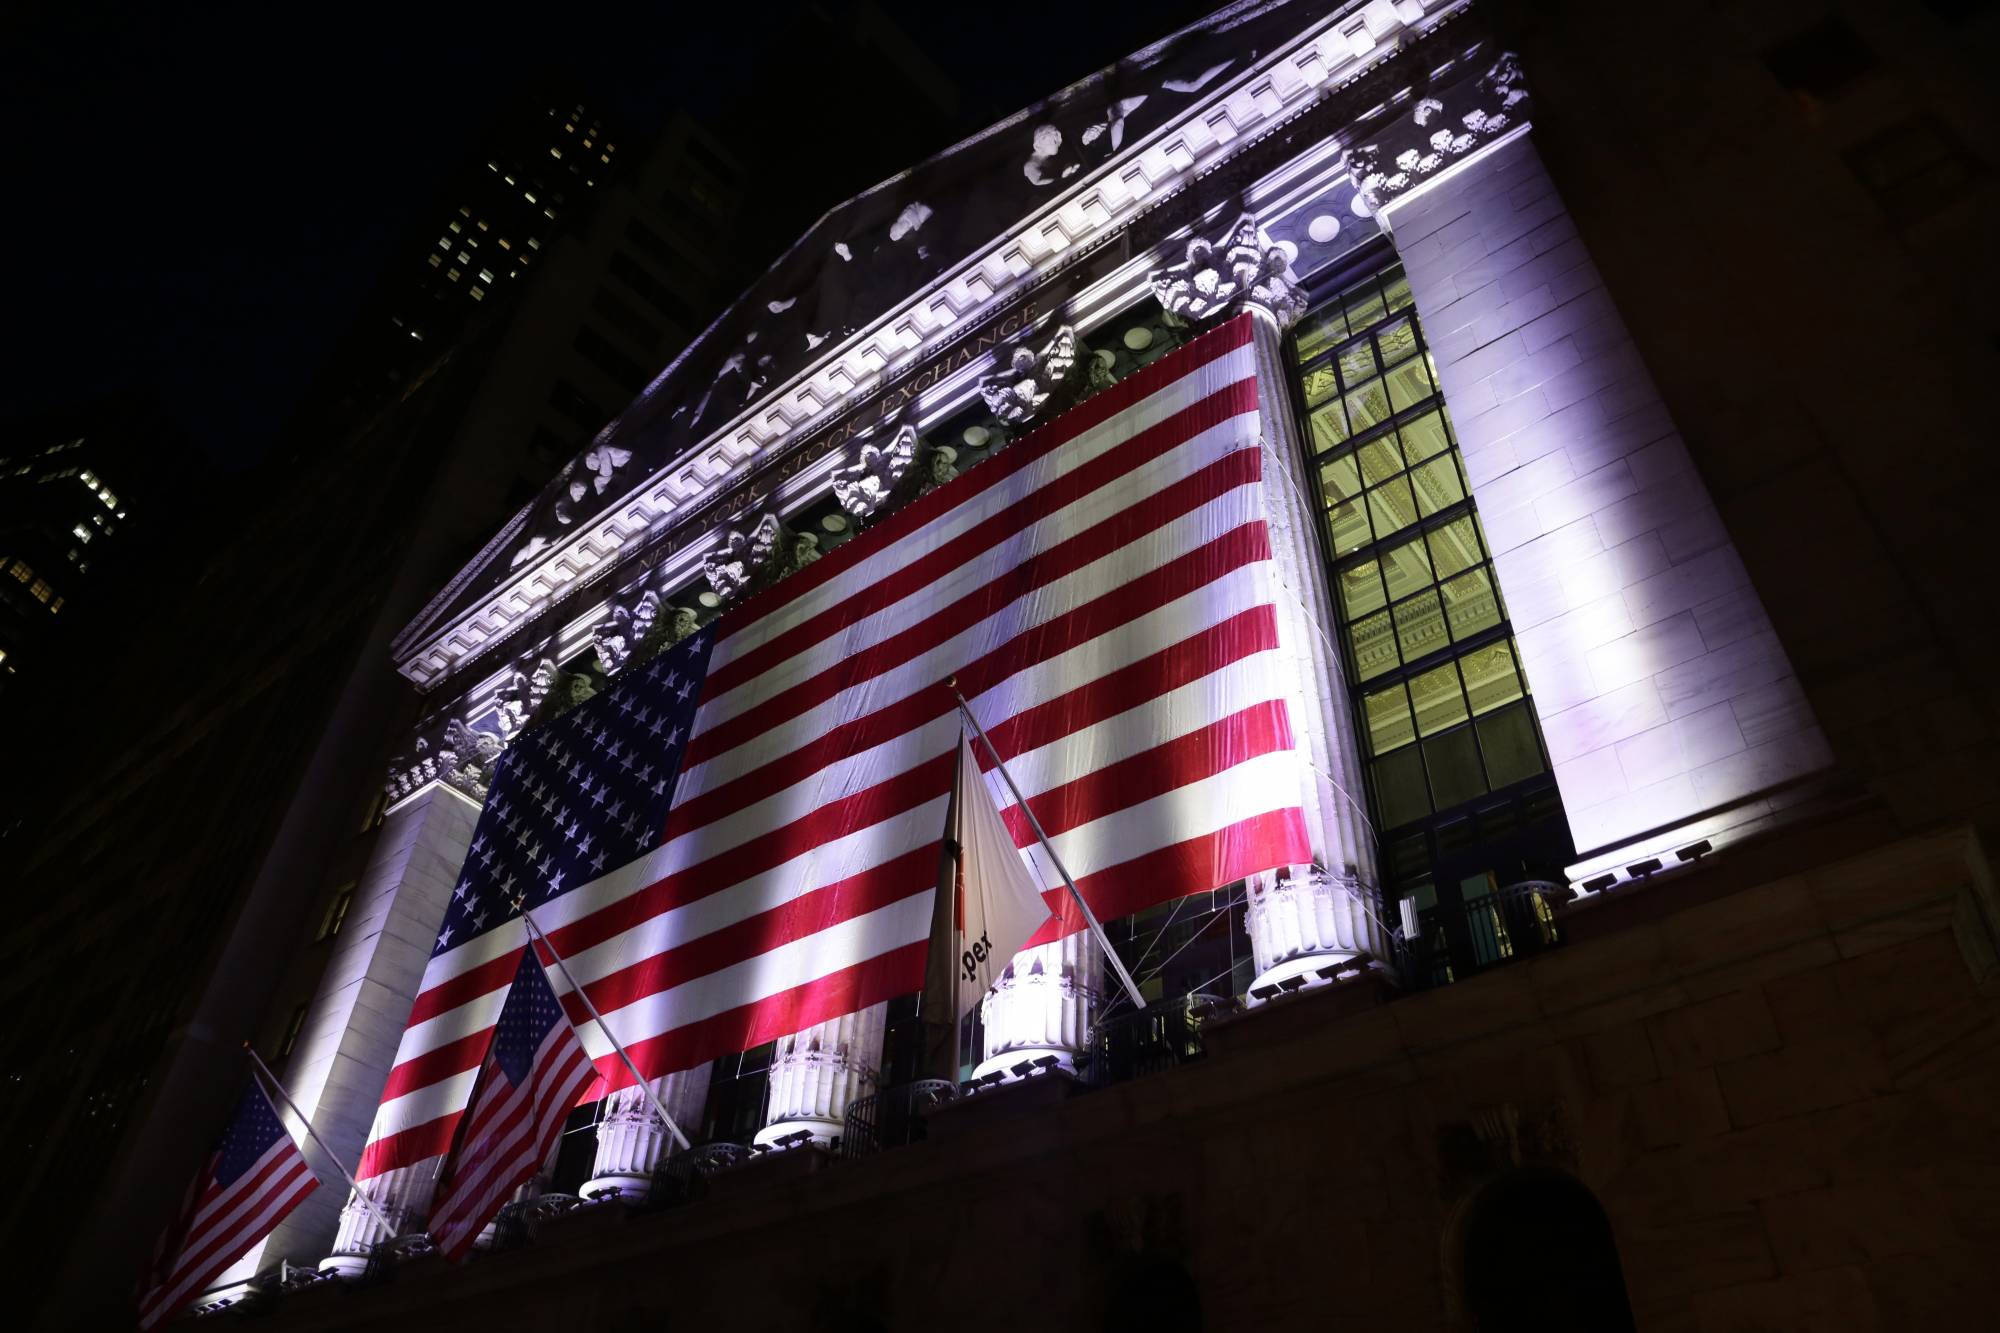 FILE - In this Friday, Feb. 17, 2017, file photo, an American flag hangs on the front of the New York Stock Exchange. U.S. stock indexes edged higher in early trading Monday, Nov. 27, as traders returned from the Thanksgiving holiday. Banks and retailers were among the big gainers. Energy stocks lagged the most as crude oil prices headed lower. Several companies were also moving on deal news. (AP Photo/Peter Morgan, File)